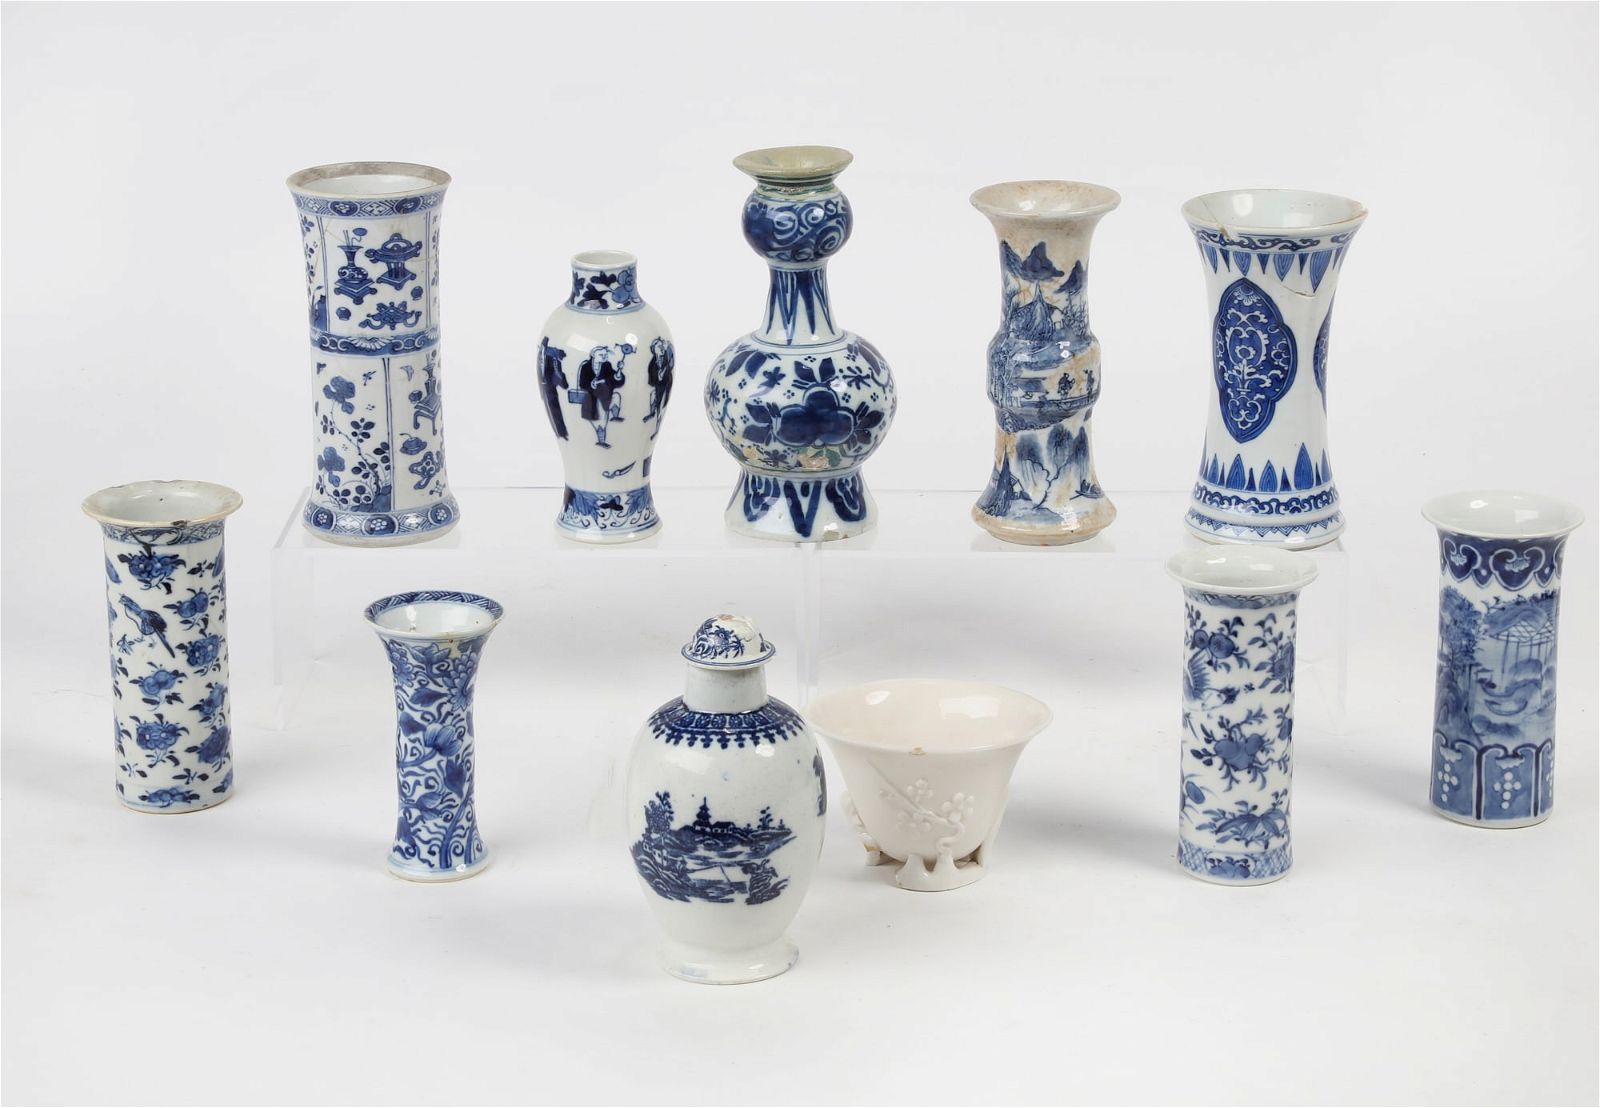 TEN CHINESE PORCELAIN VASES AND